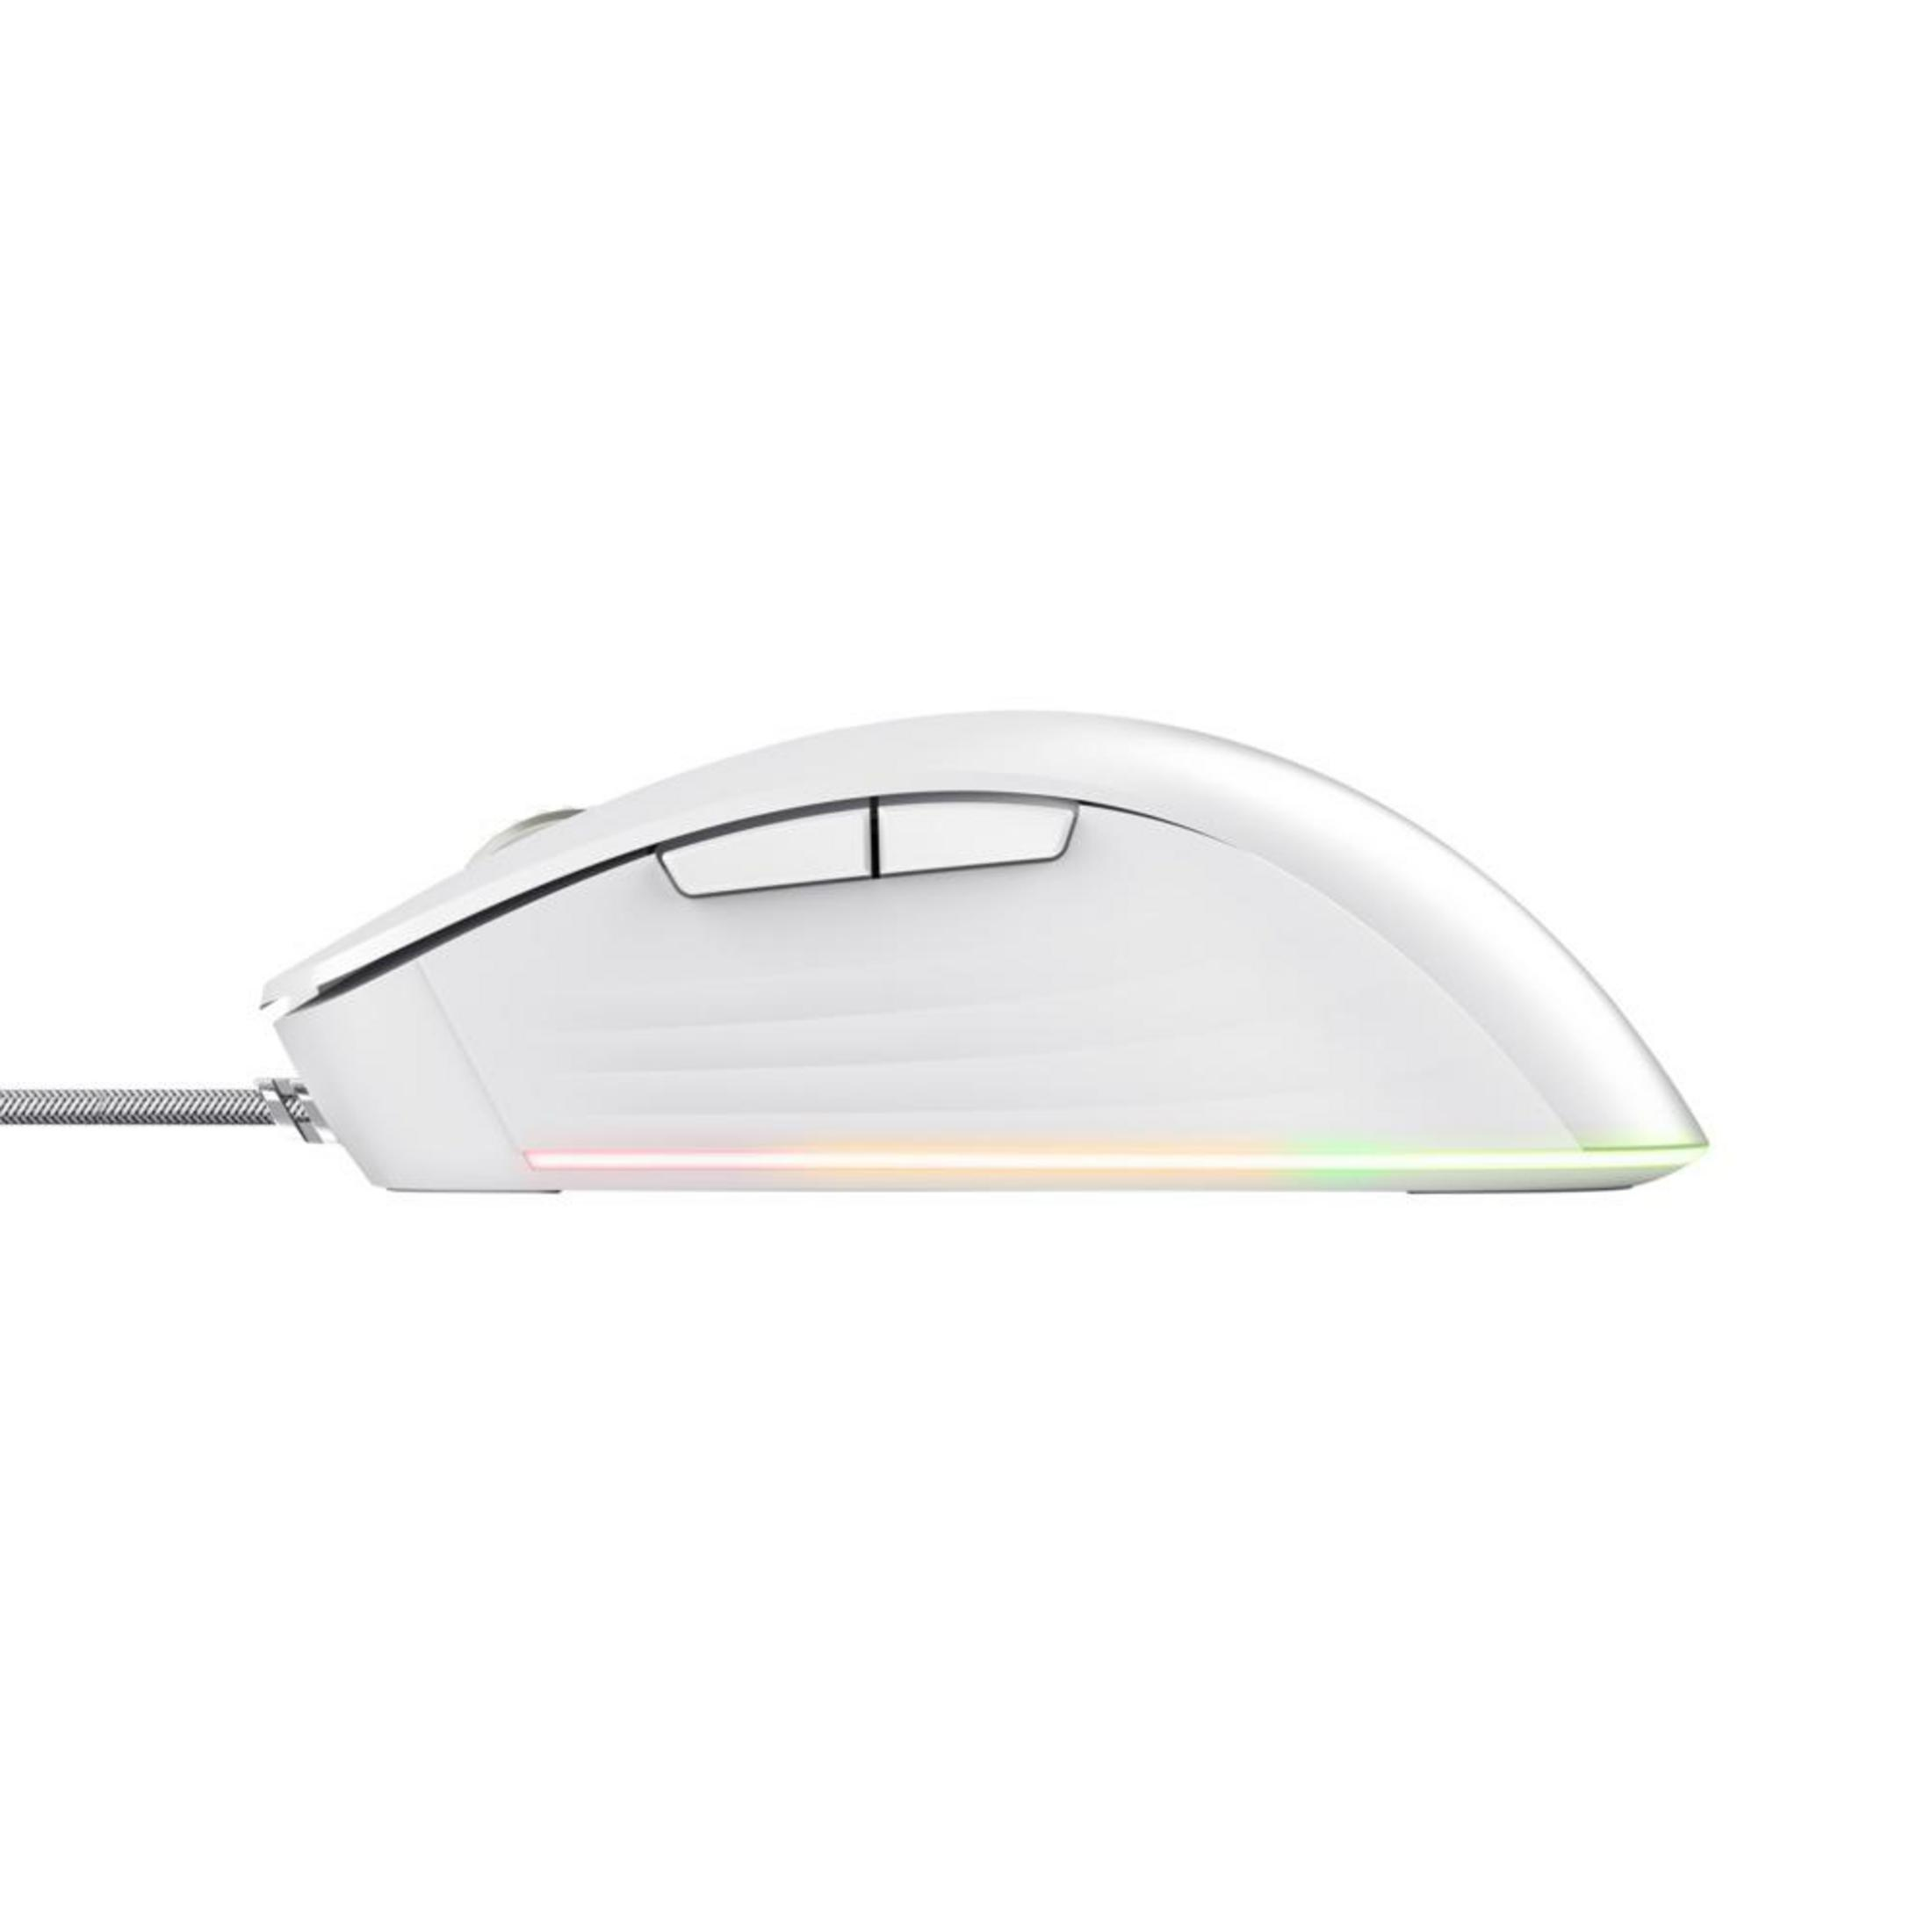 GAMING TRUST Weiß MOUSE Maus, GXT924W Gaming YBAR+ 24891 WHITE